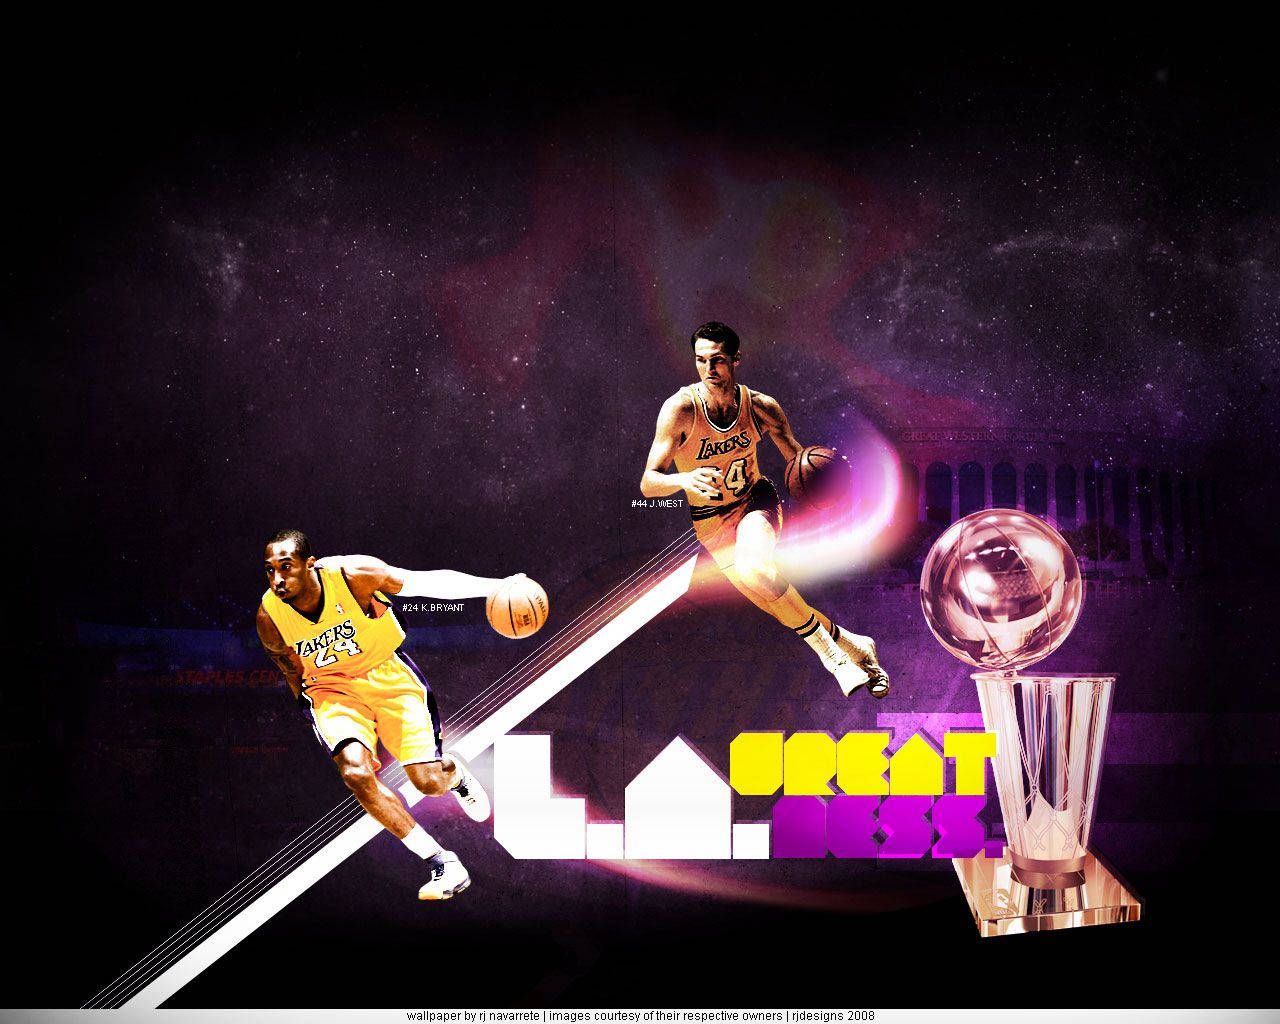 Jerry West Kobe Bryant Lakers Greatness Poster Wallpaper